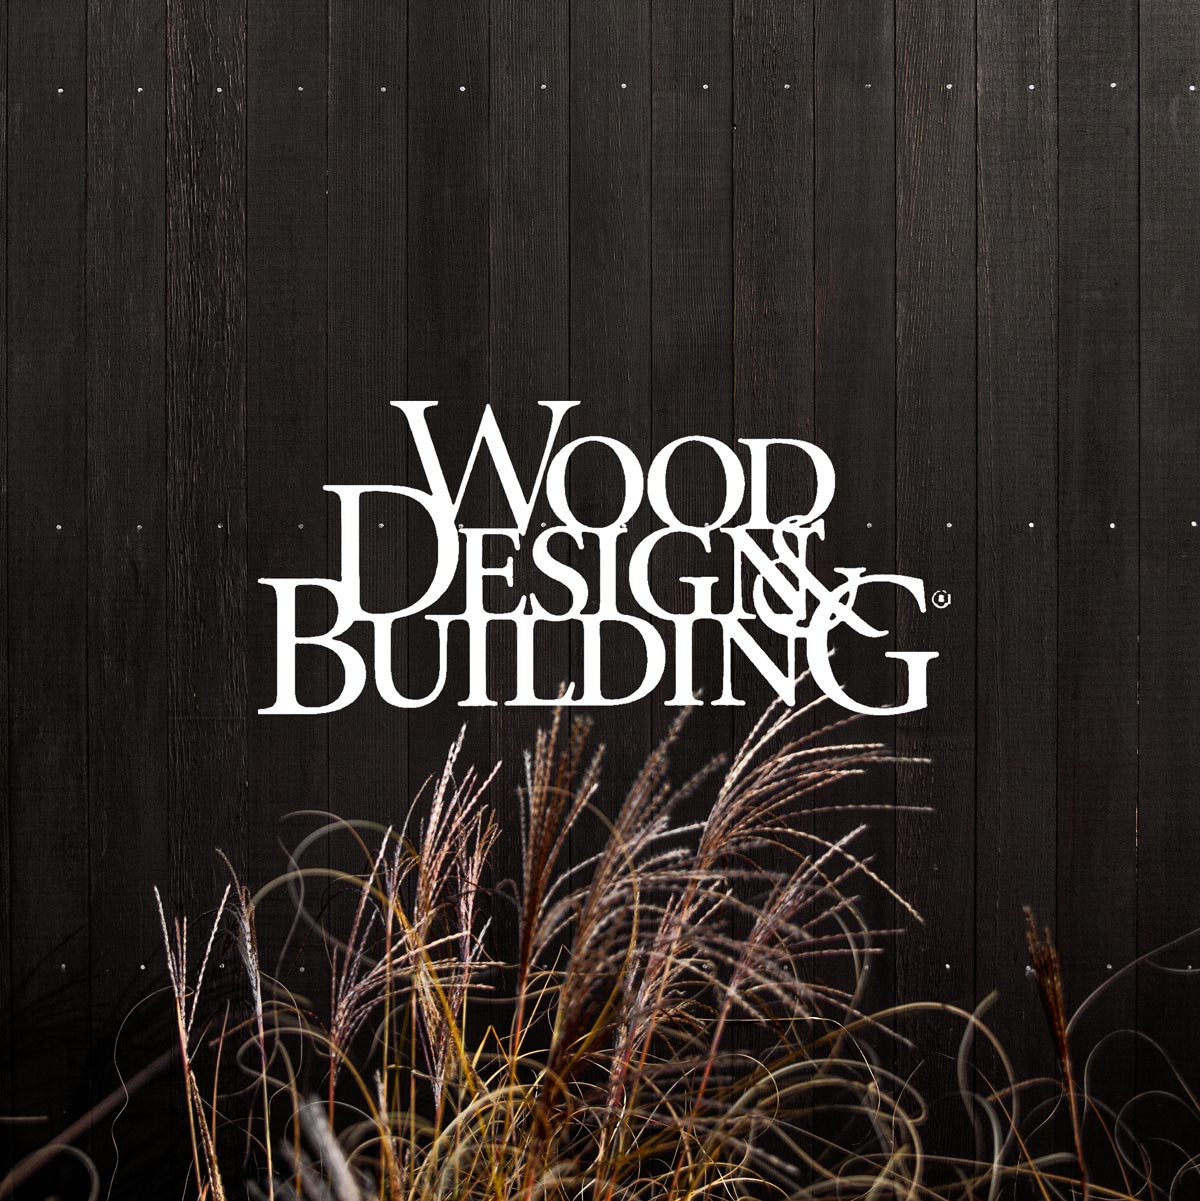 The Up Studio wins a Wood Design and Building Award for our Harbor Hideaway resicence